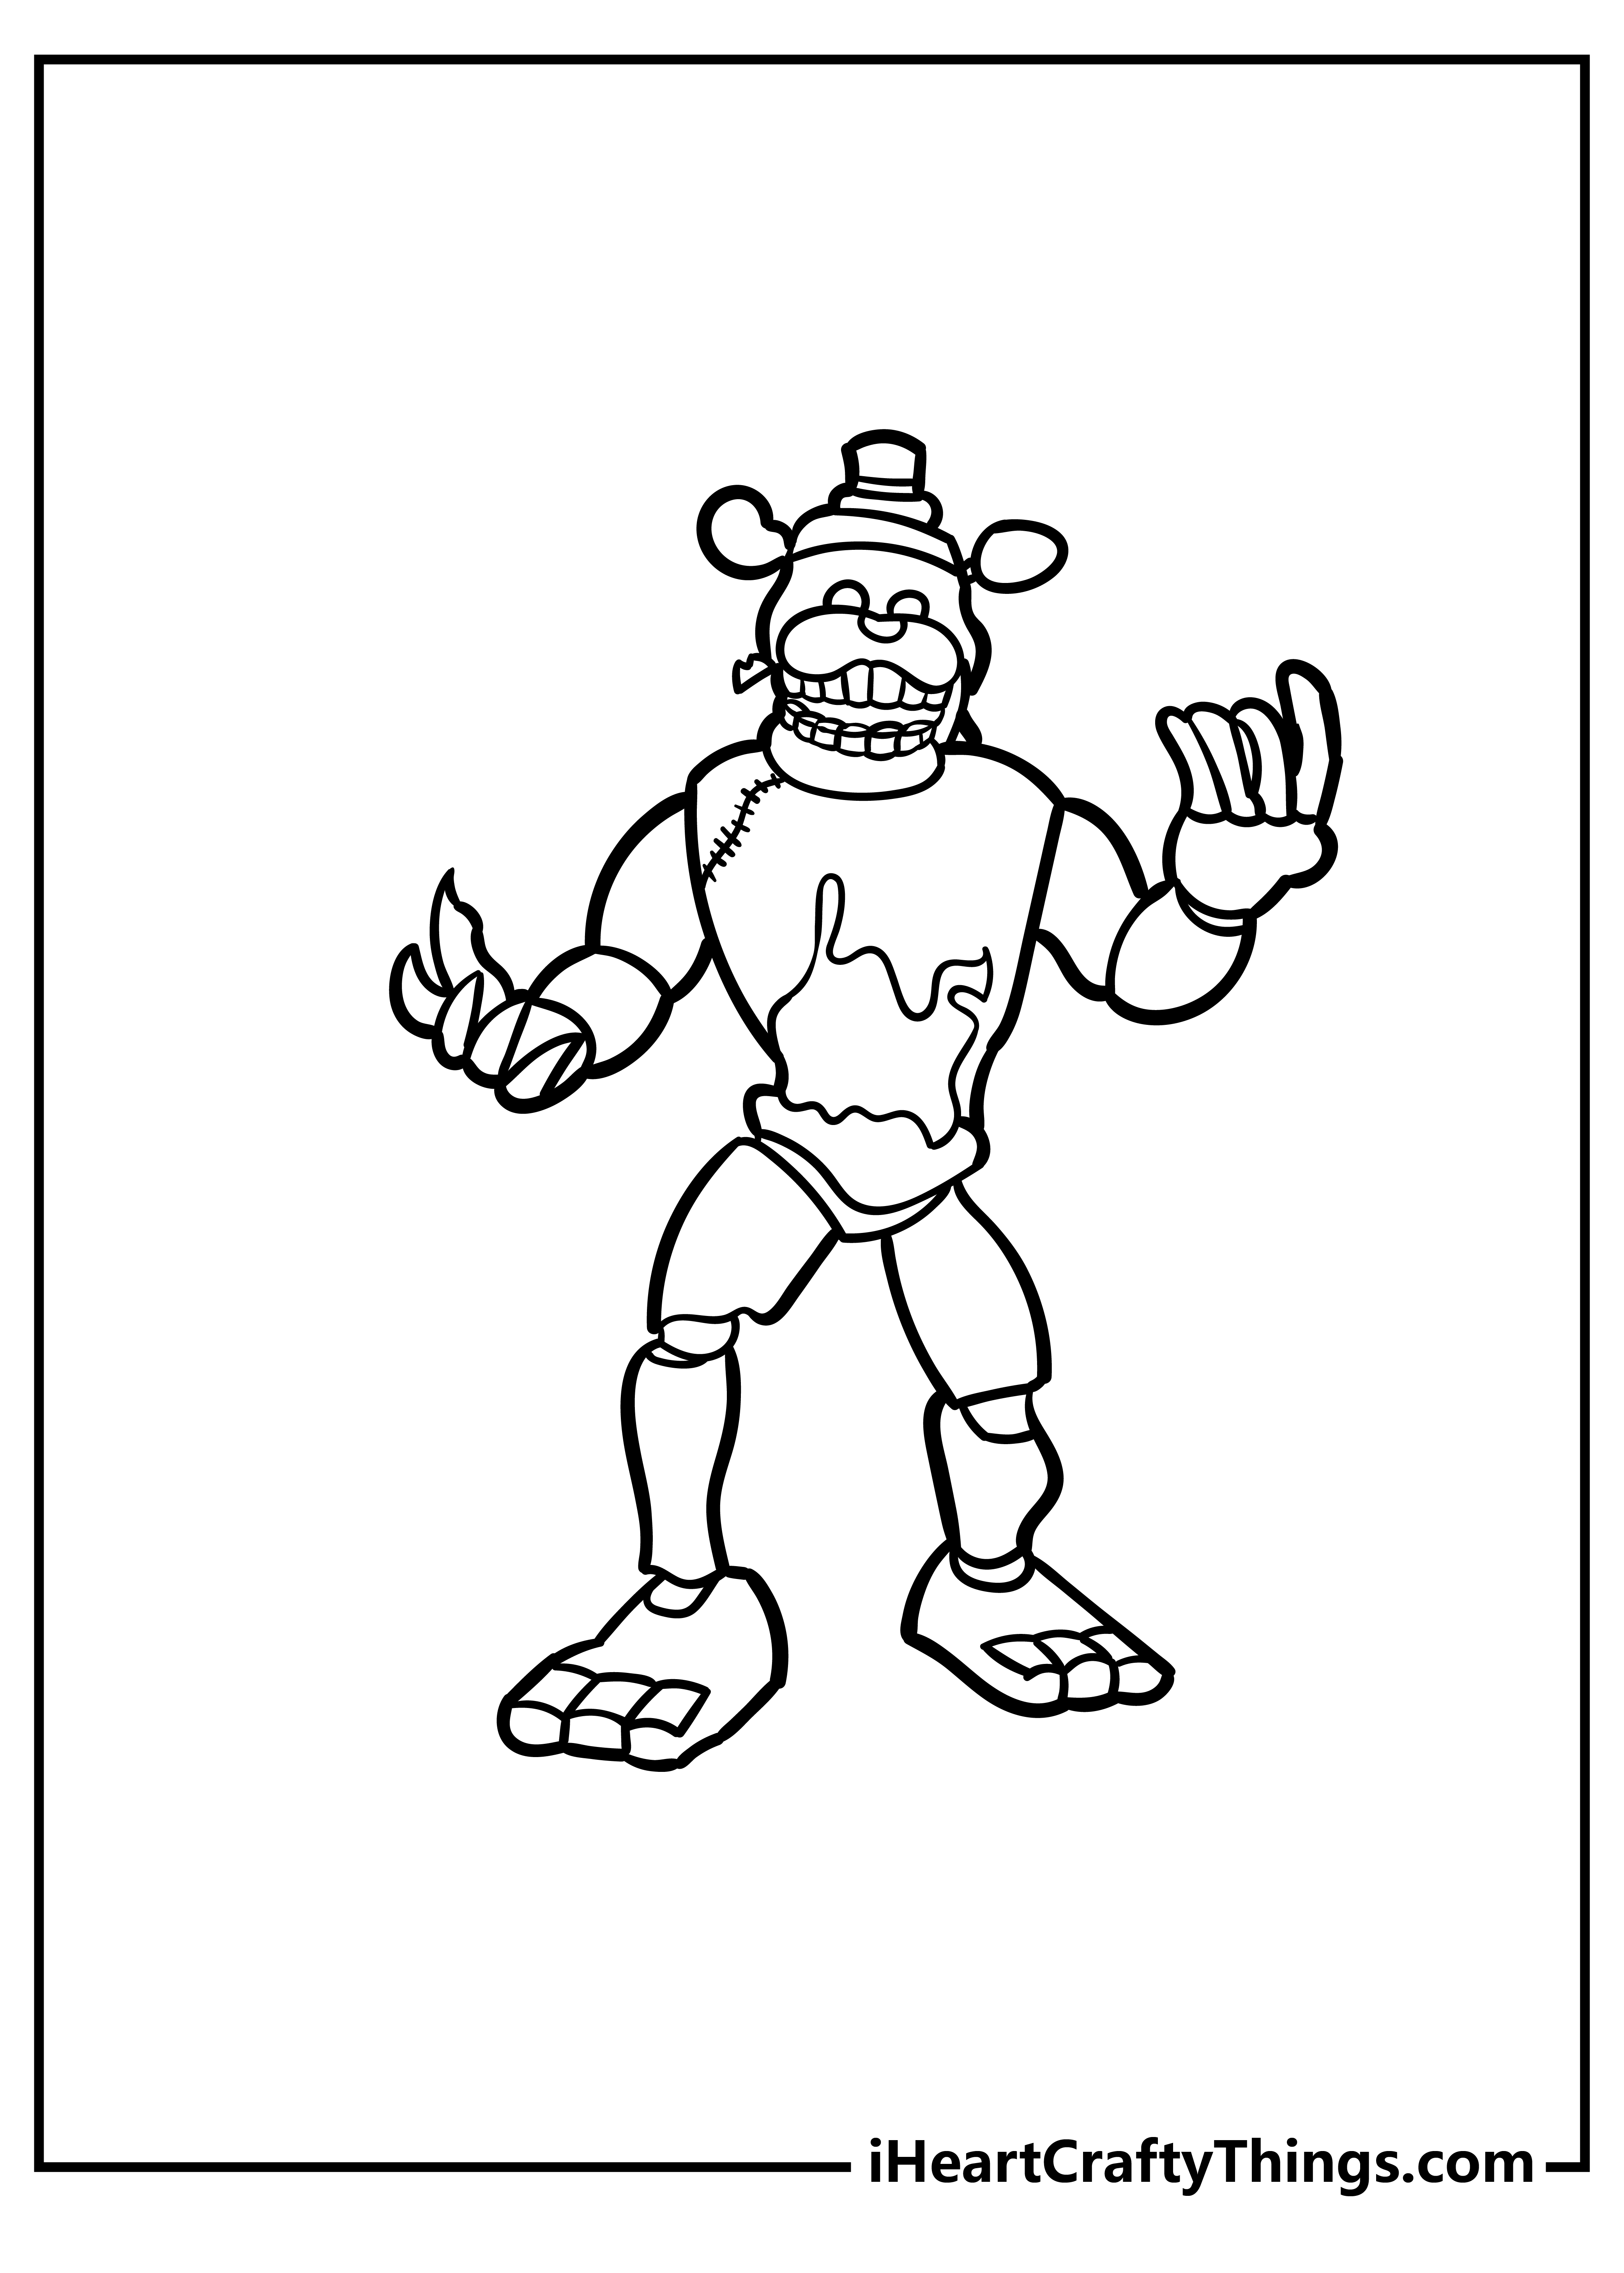 Five Nights At Freddy’s Coloring Book for kids free printable